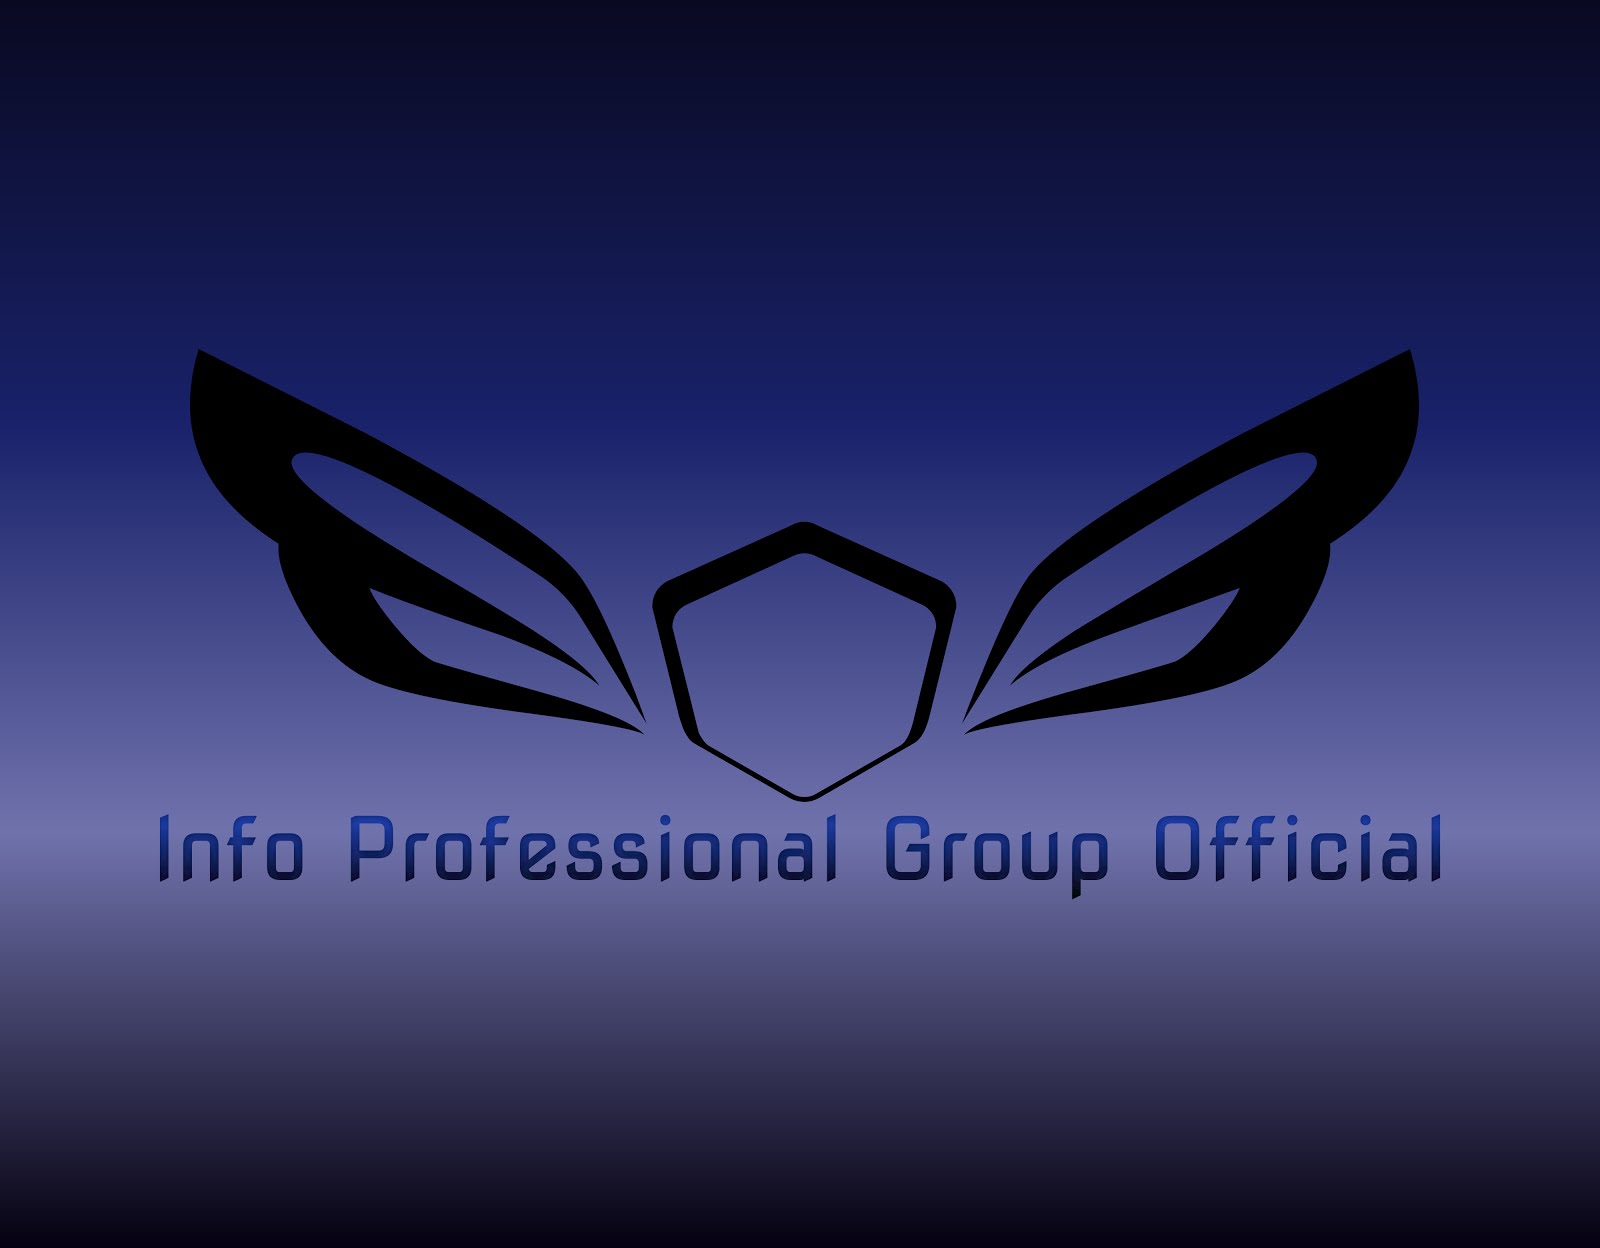  Professional Group official